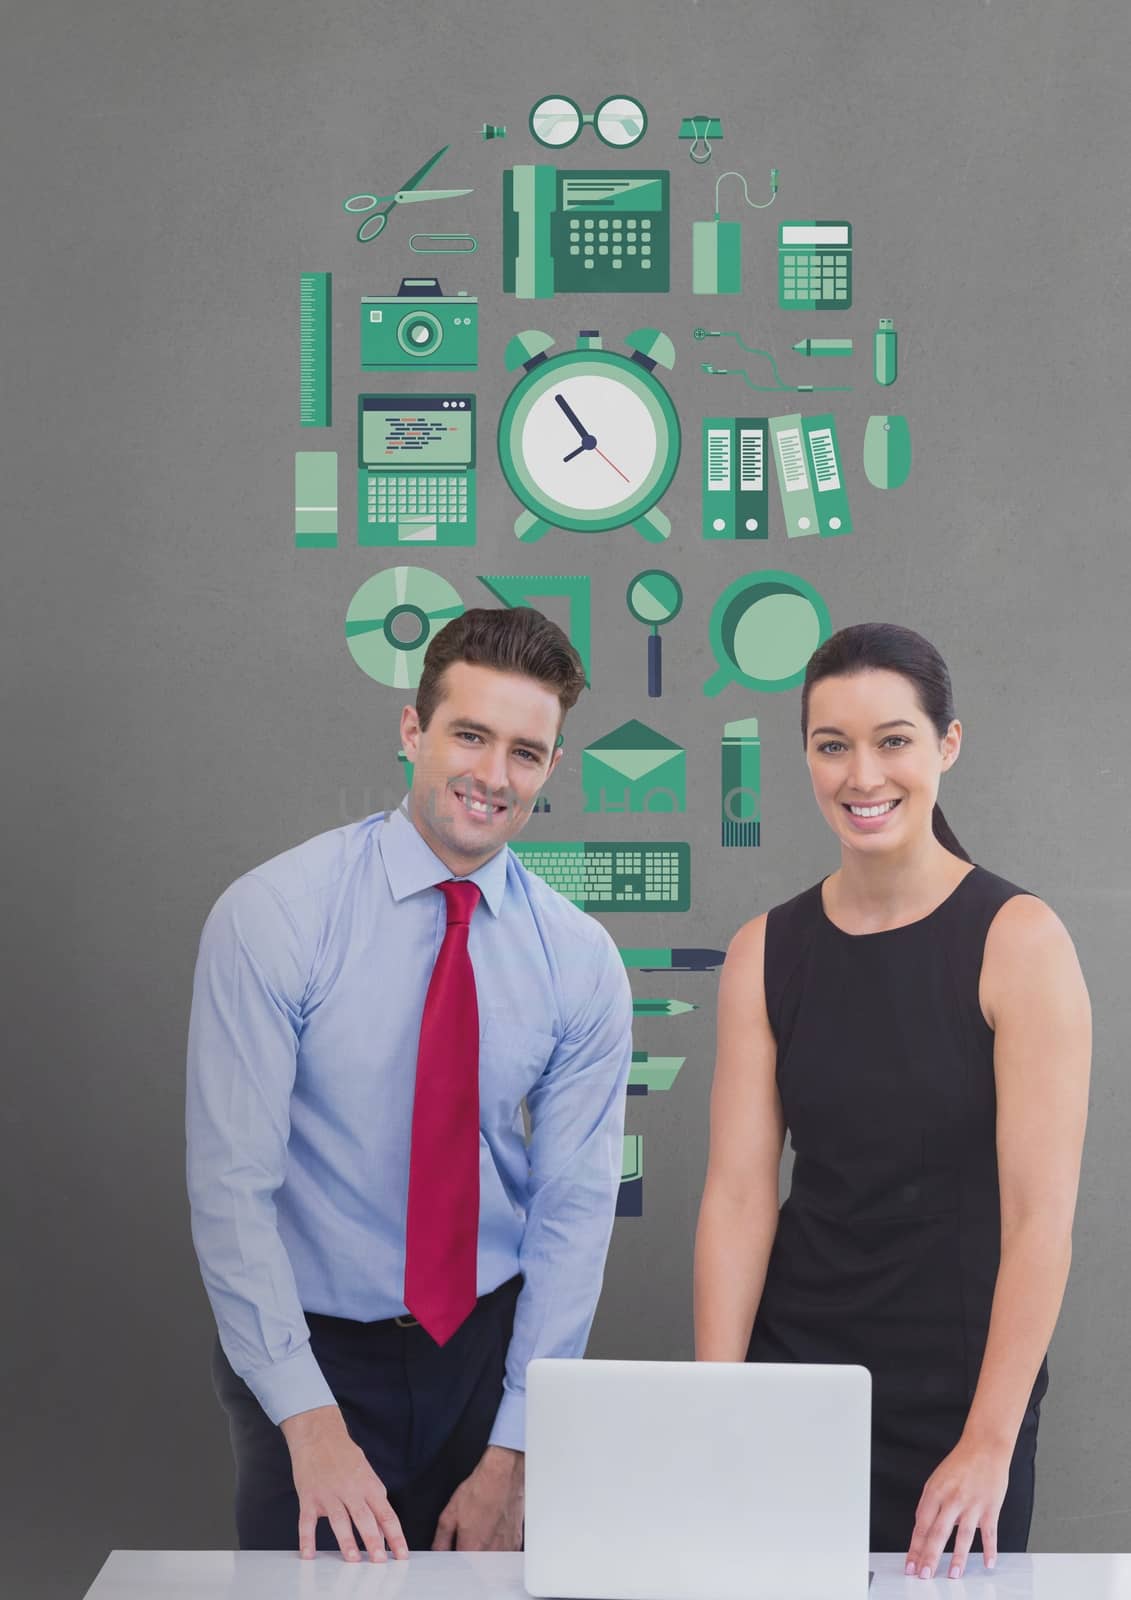 Digital composite of Happy business people at a desk using a computer against grey background with green graphic